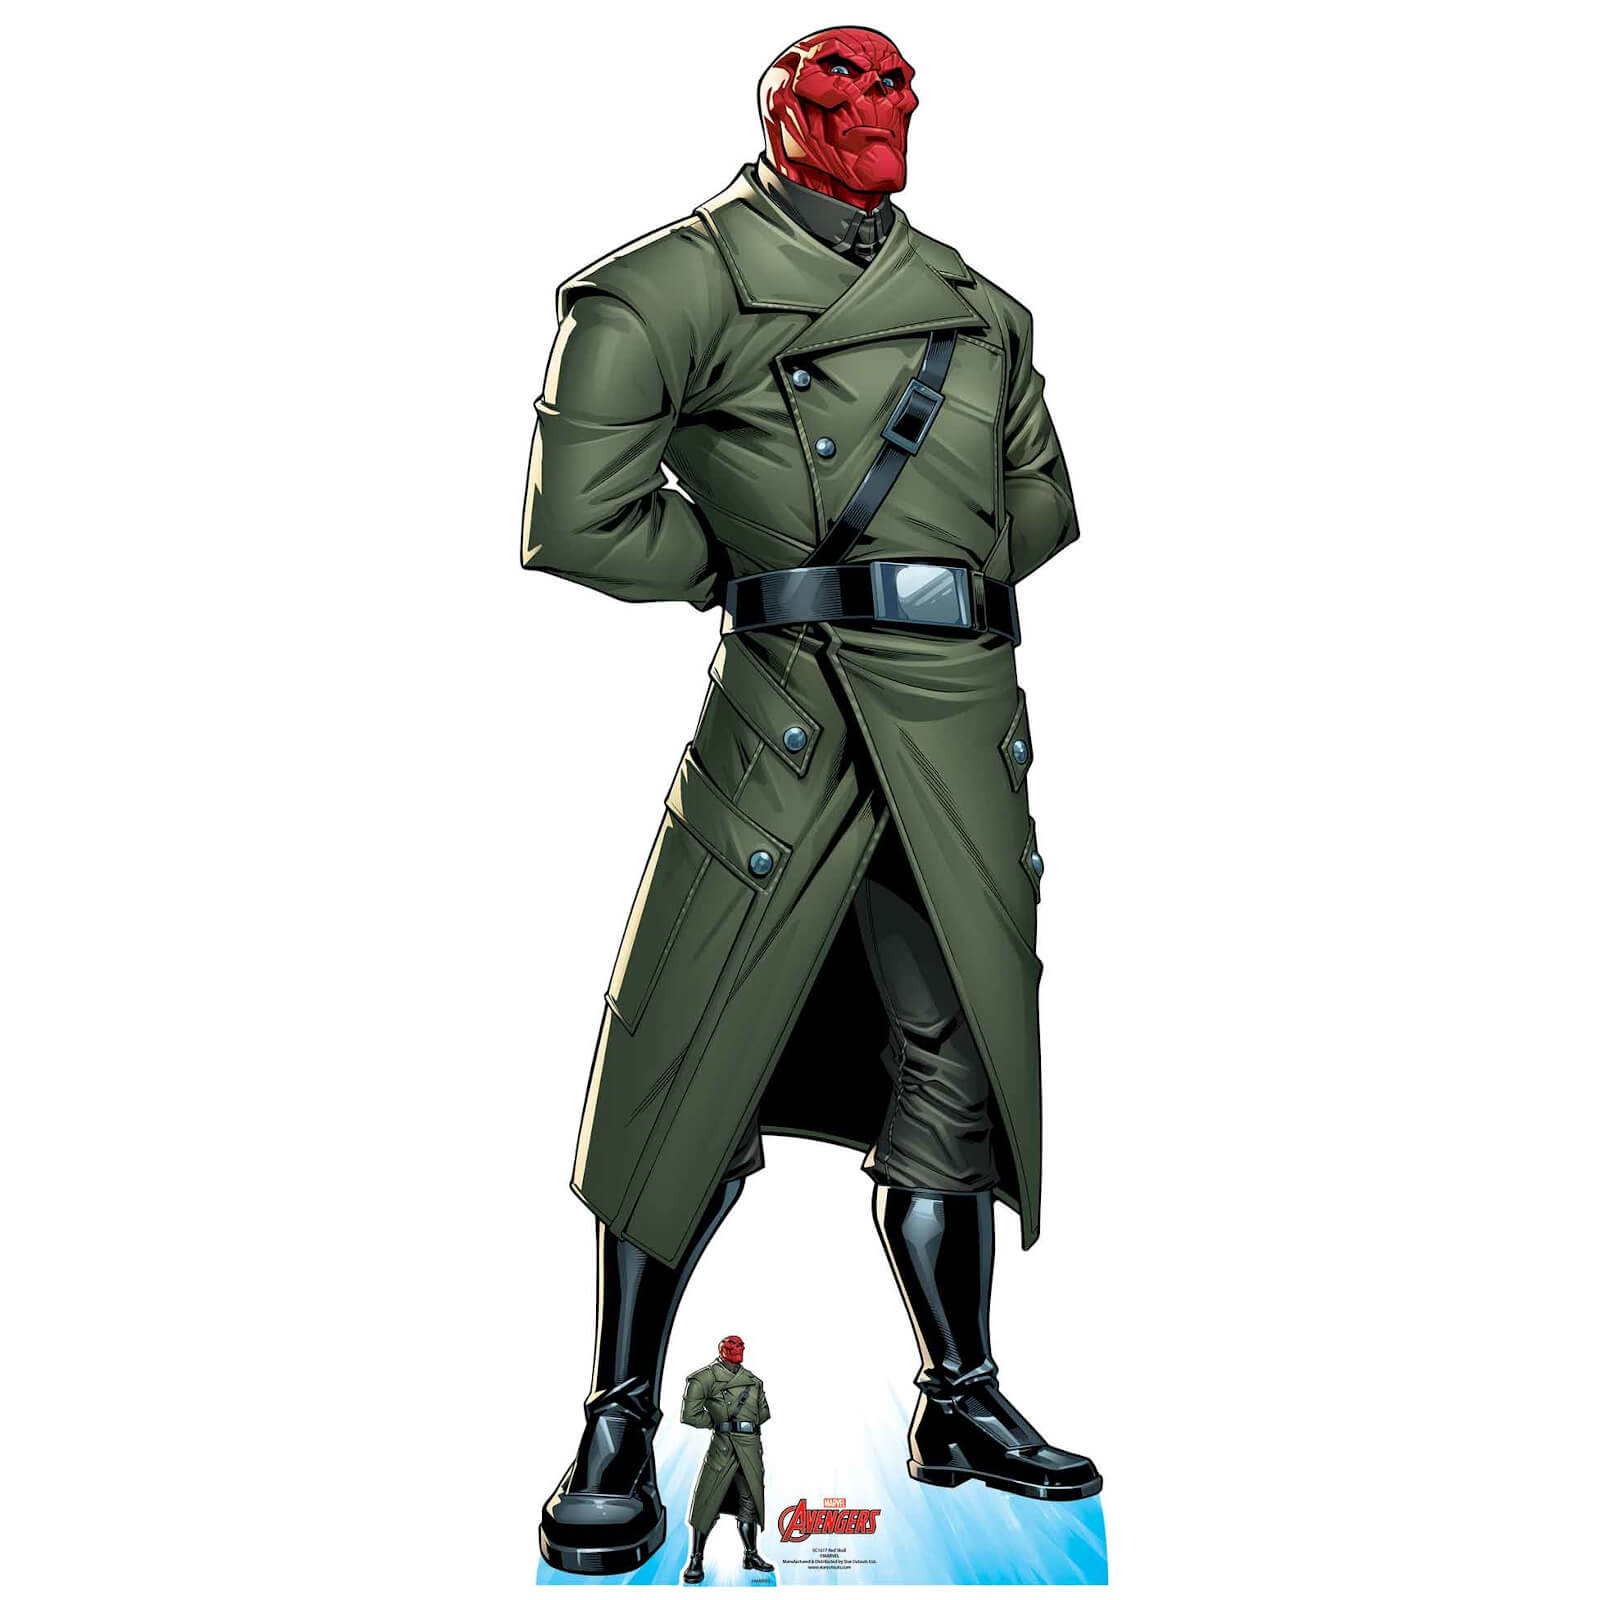 The Avengers Red Skull Lifesized Cardboard Cut Out